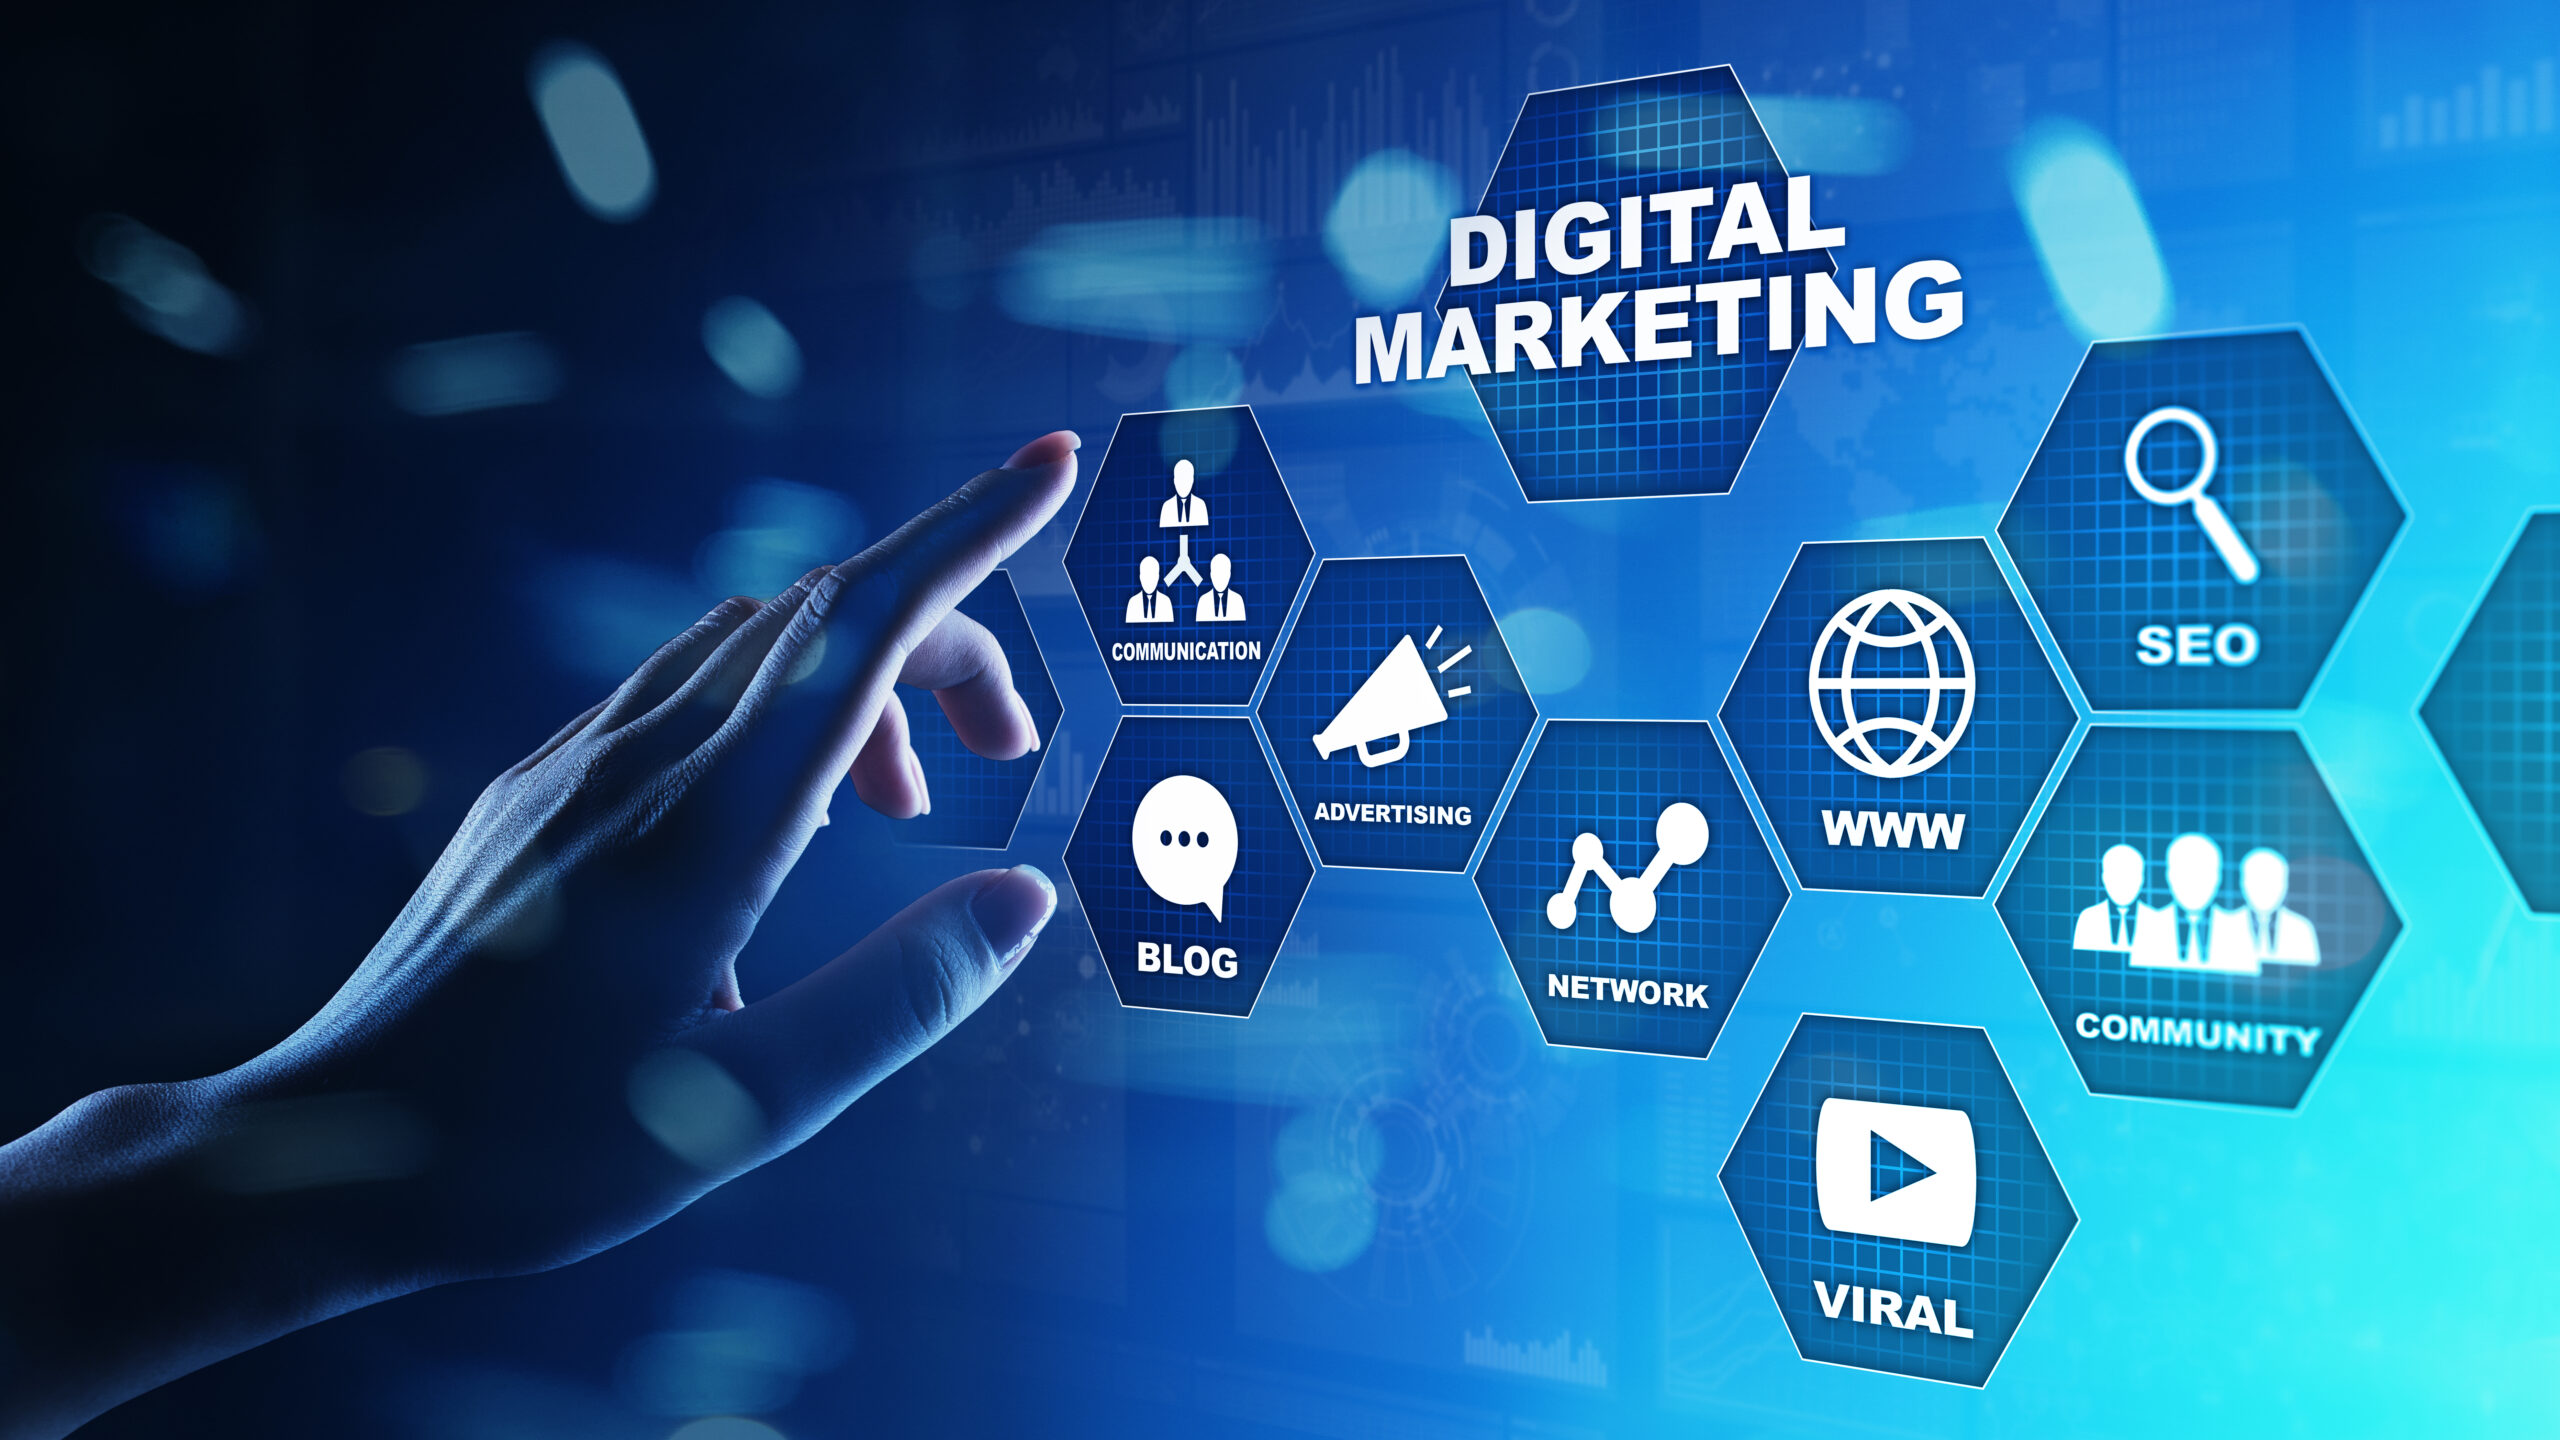 Expand Your Business Using Digital Marketing Services